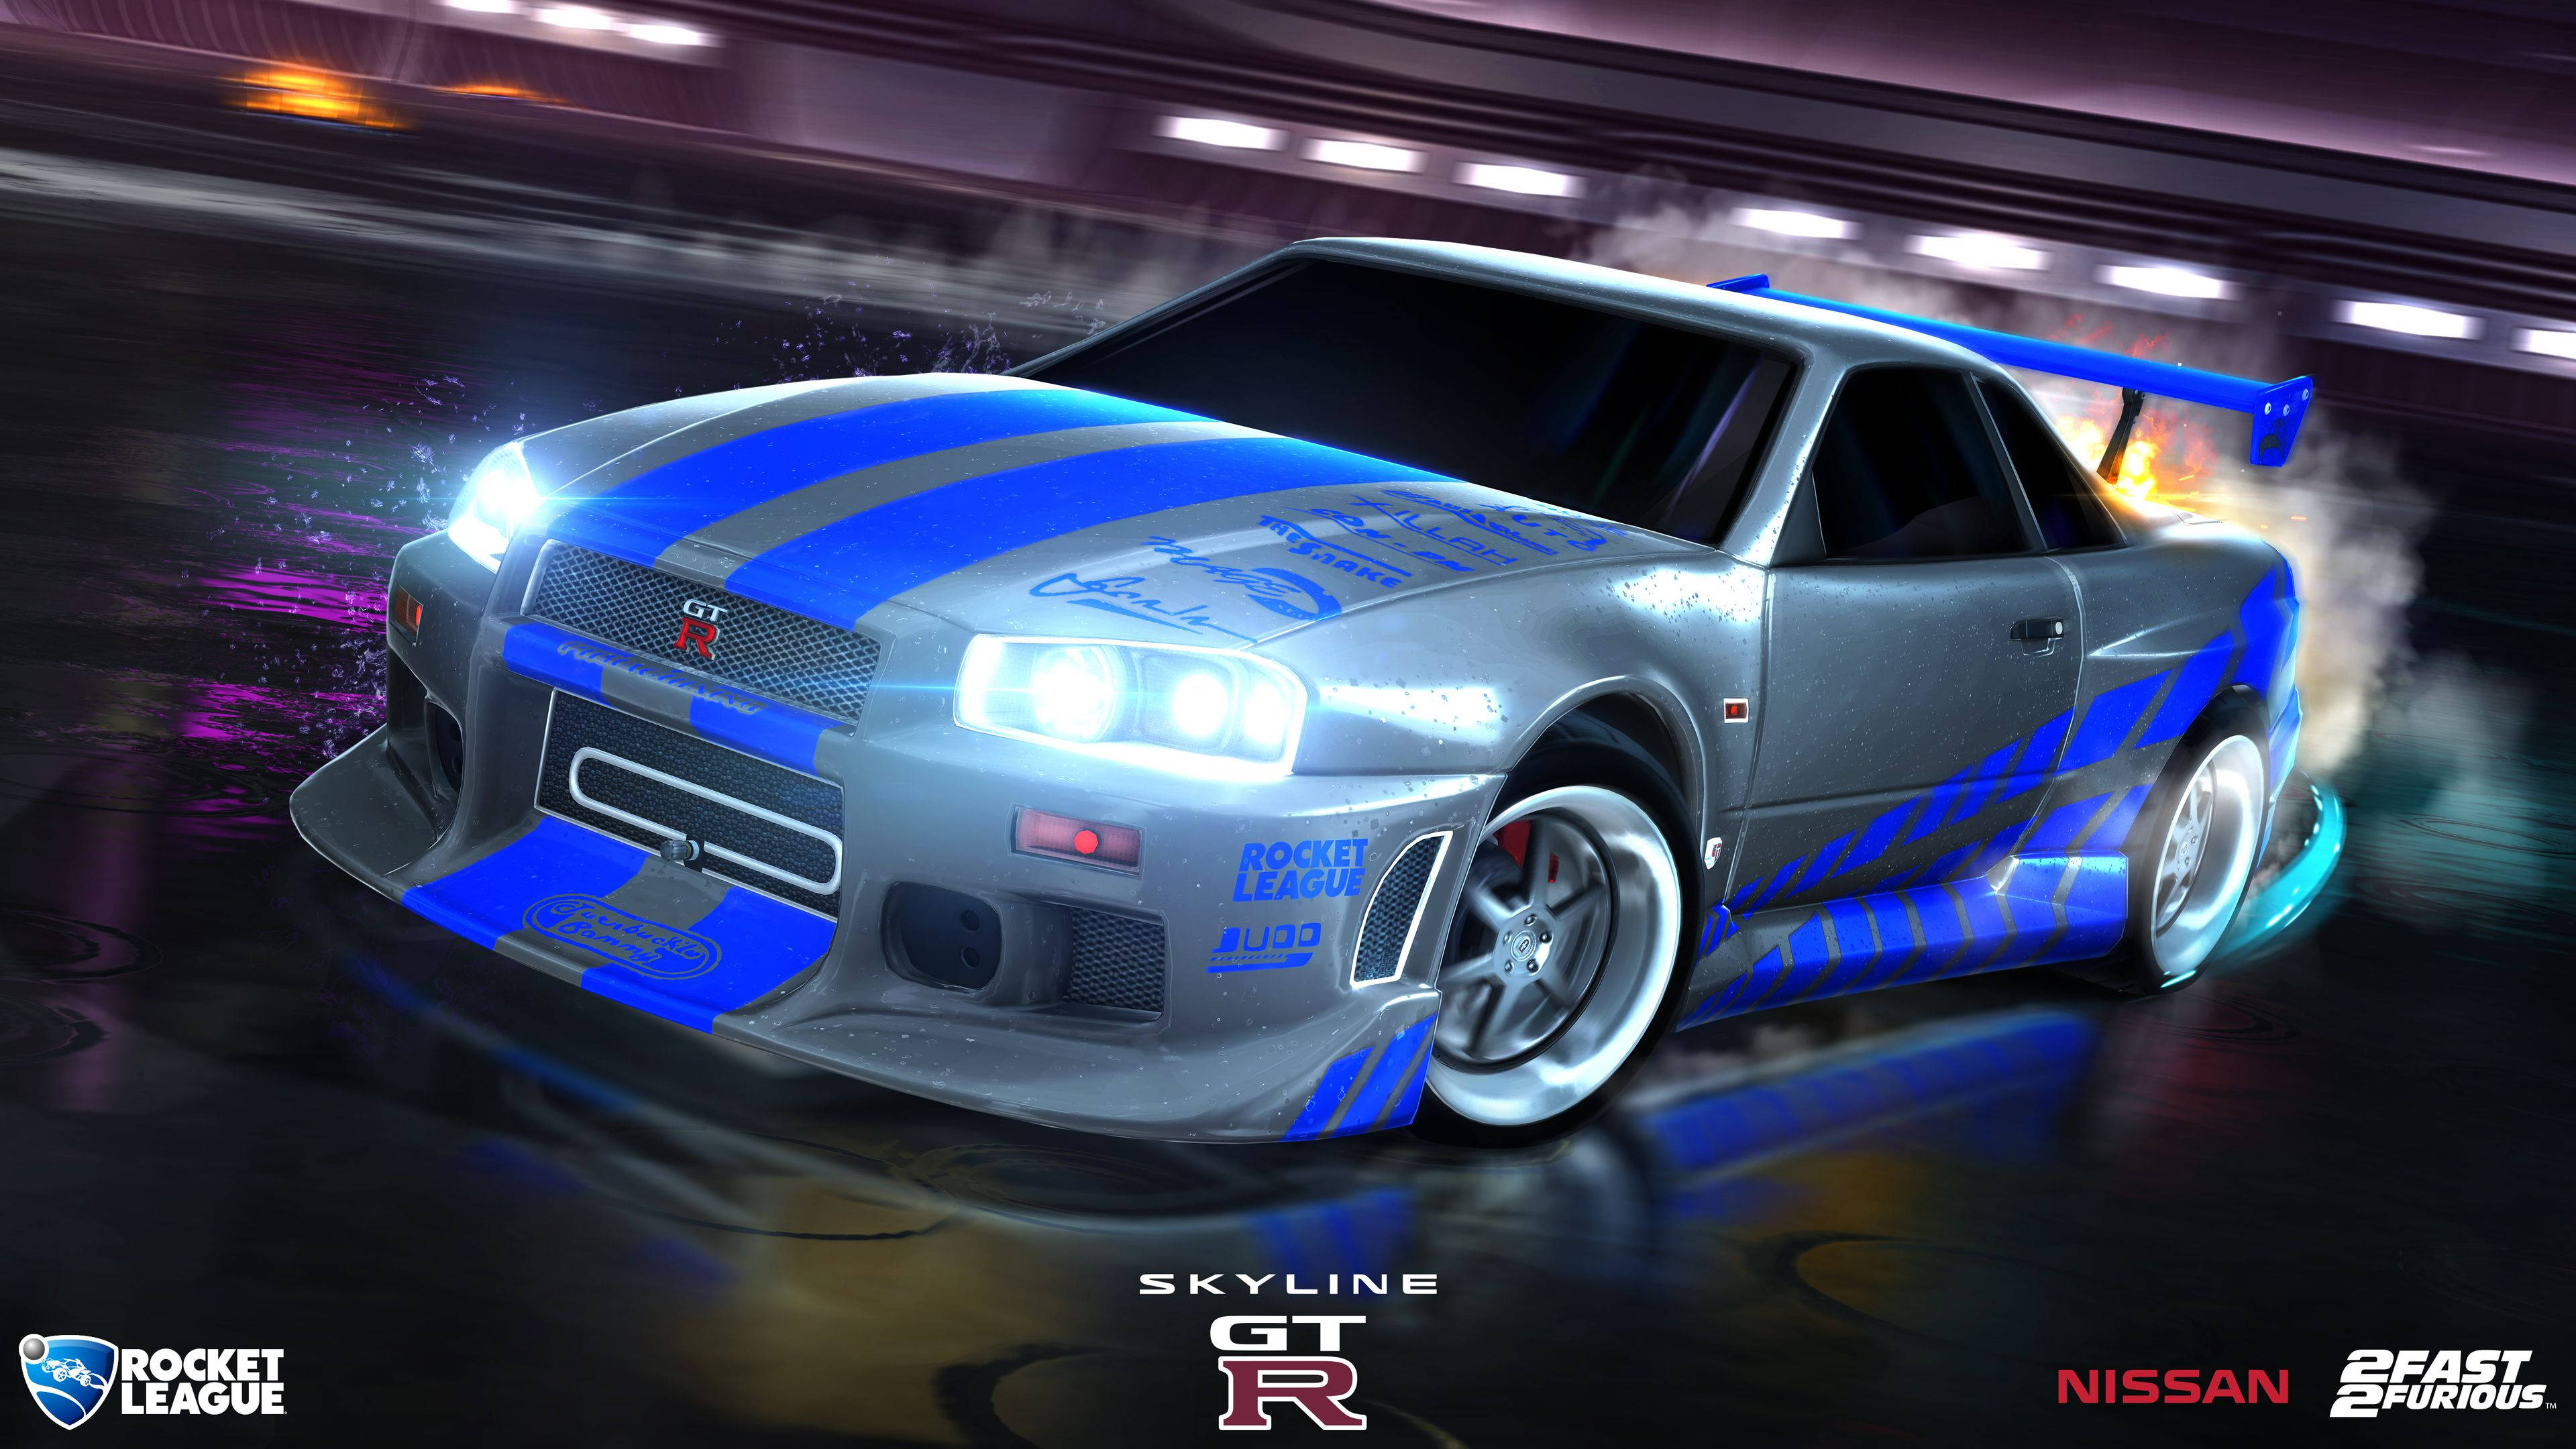 Fast And Furious Wallpapers